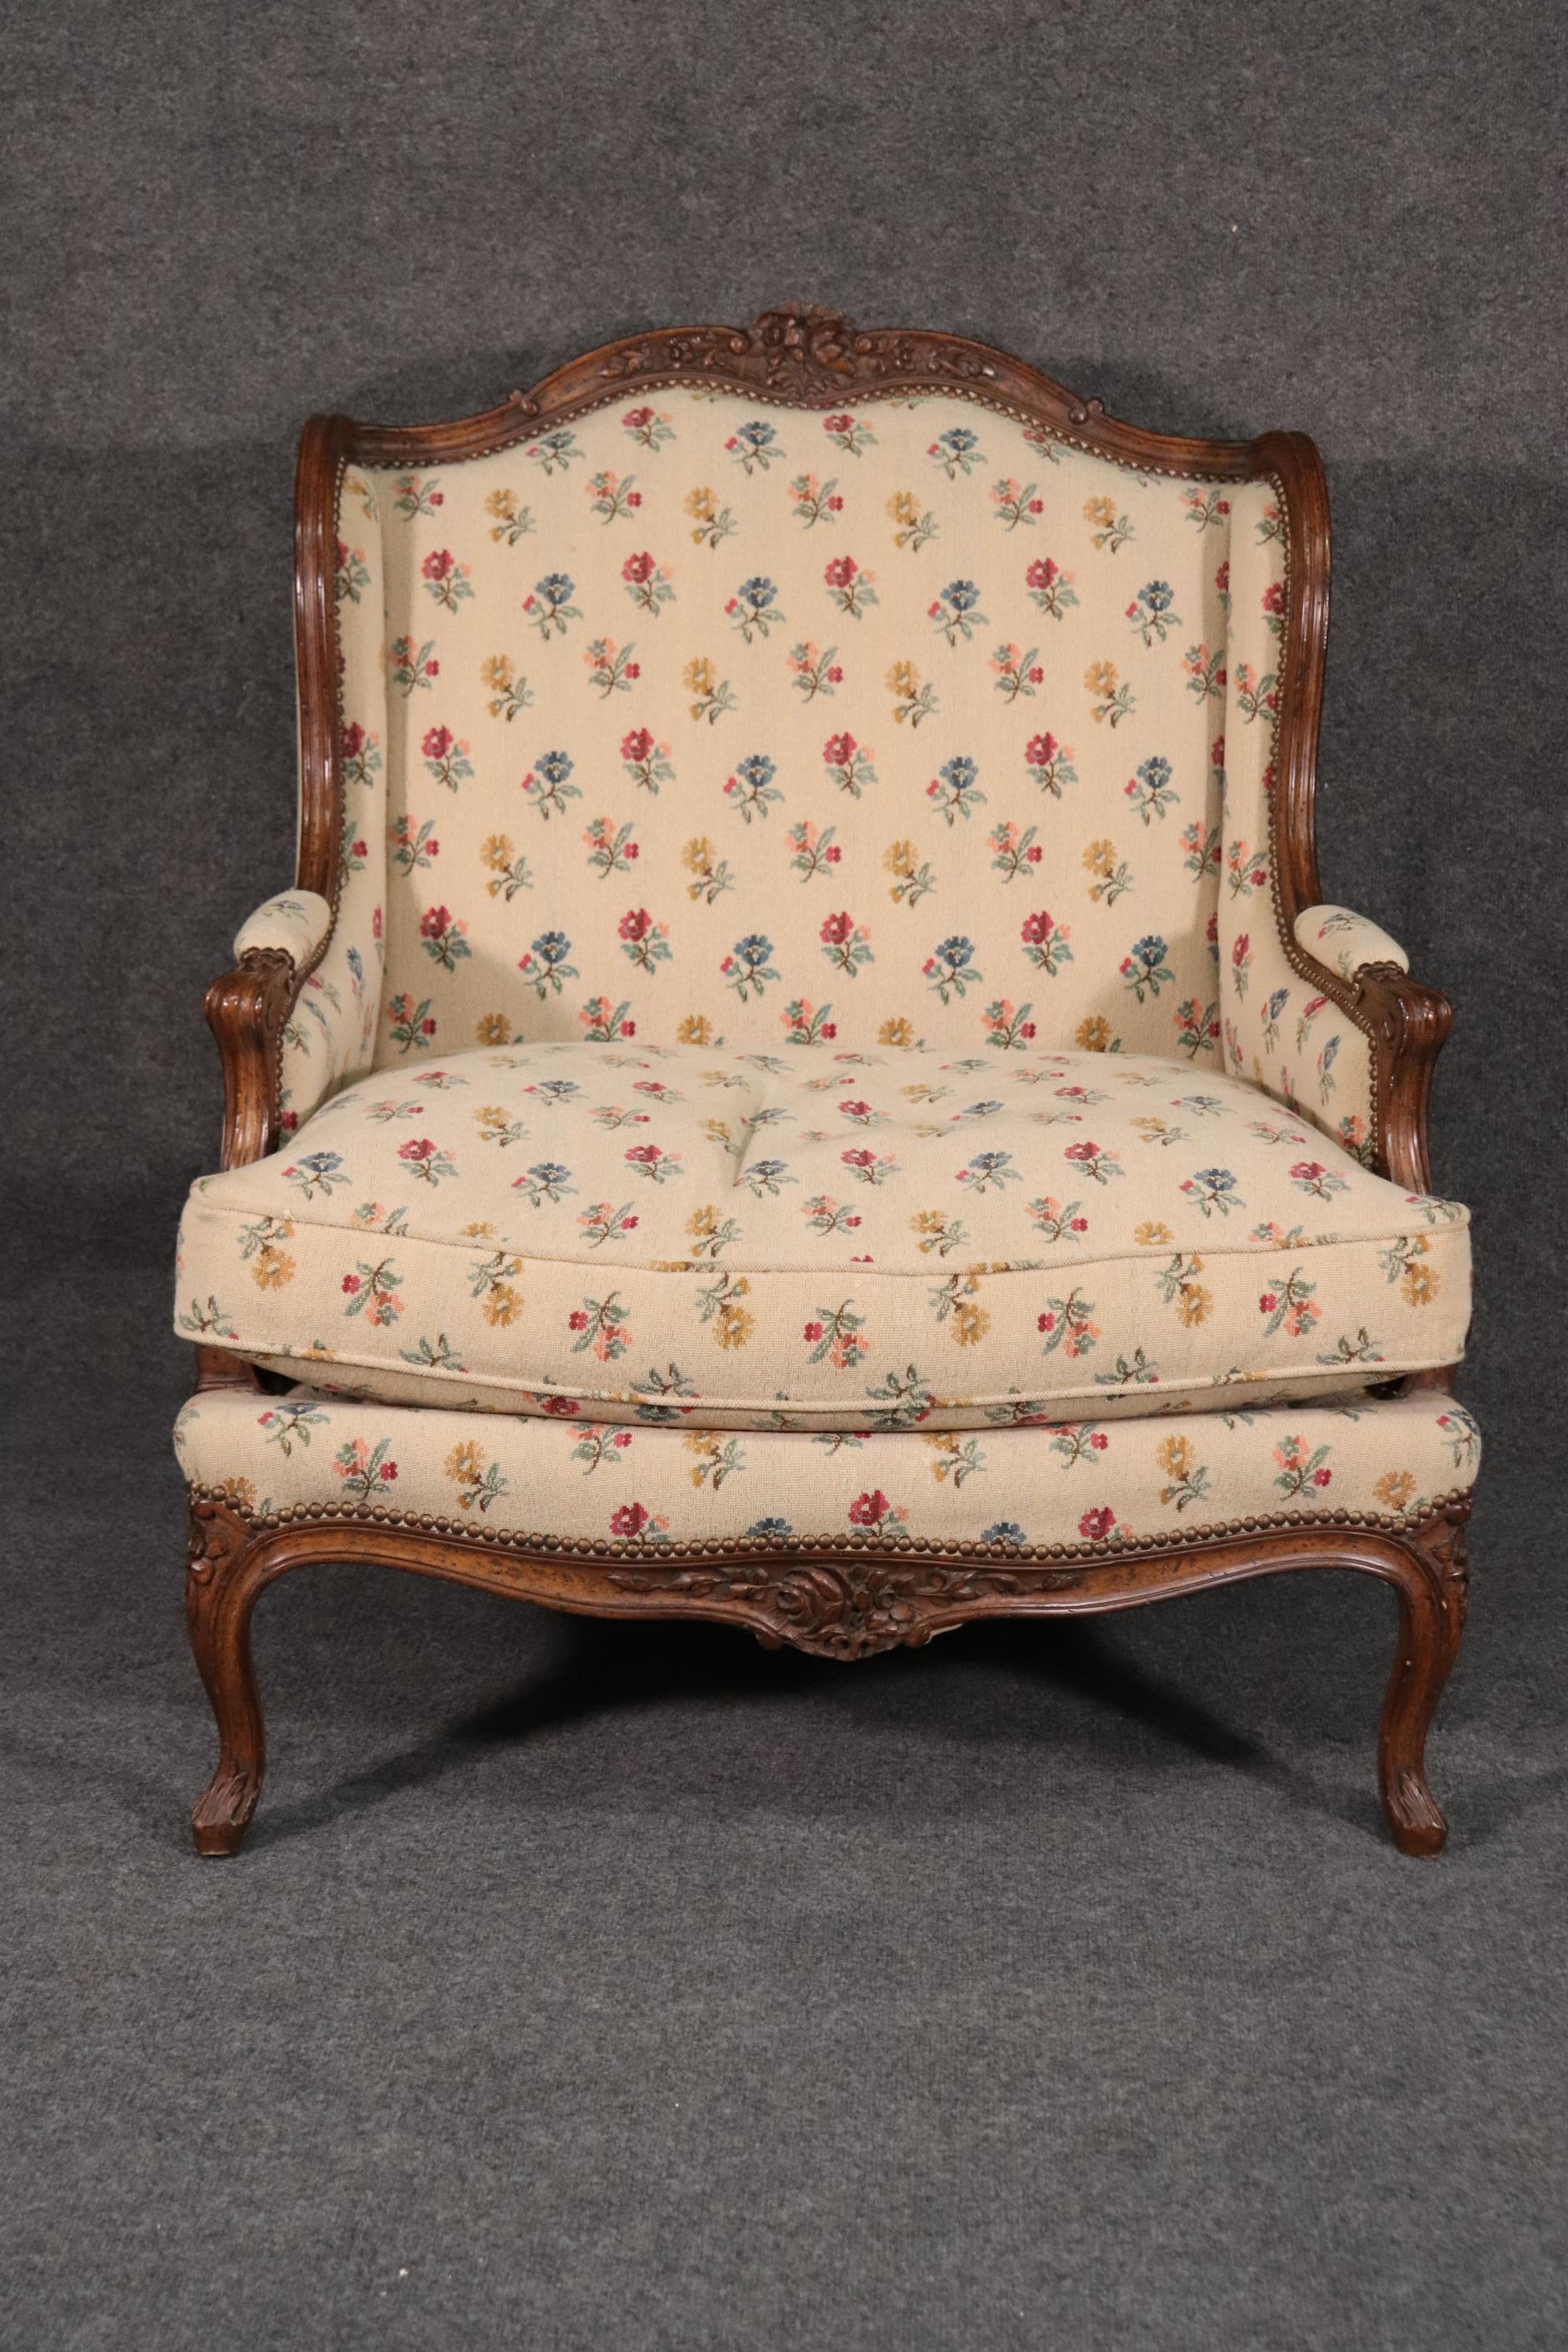 This is a gorgeous and beautifully carved bergere or marquis as it is a wide chair. The chair has terrifi carving and even the upholstery is beautiful and tasteful. The chair dates to the 1950s era and is in good original condition. Measures 42 tall